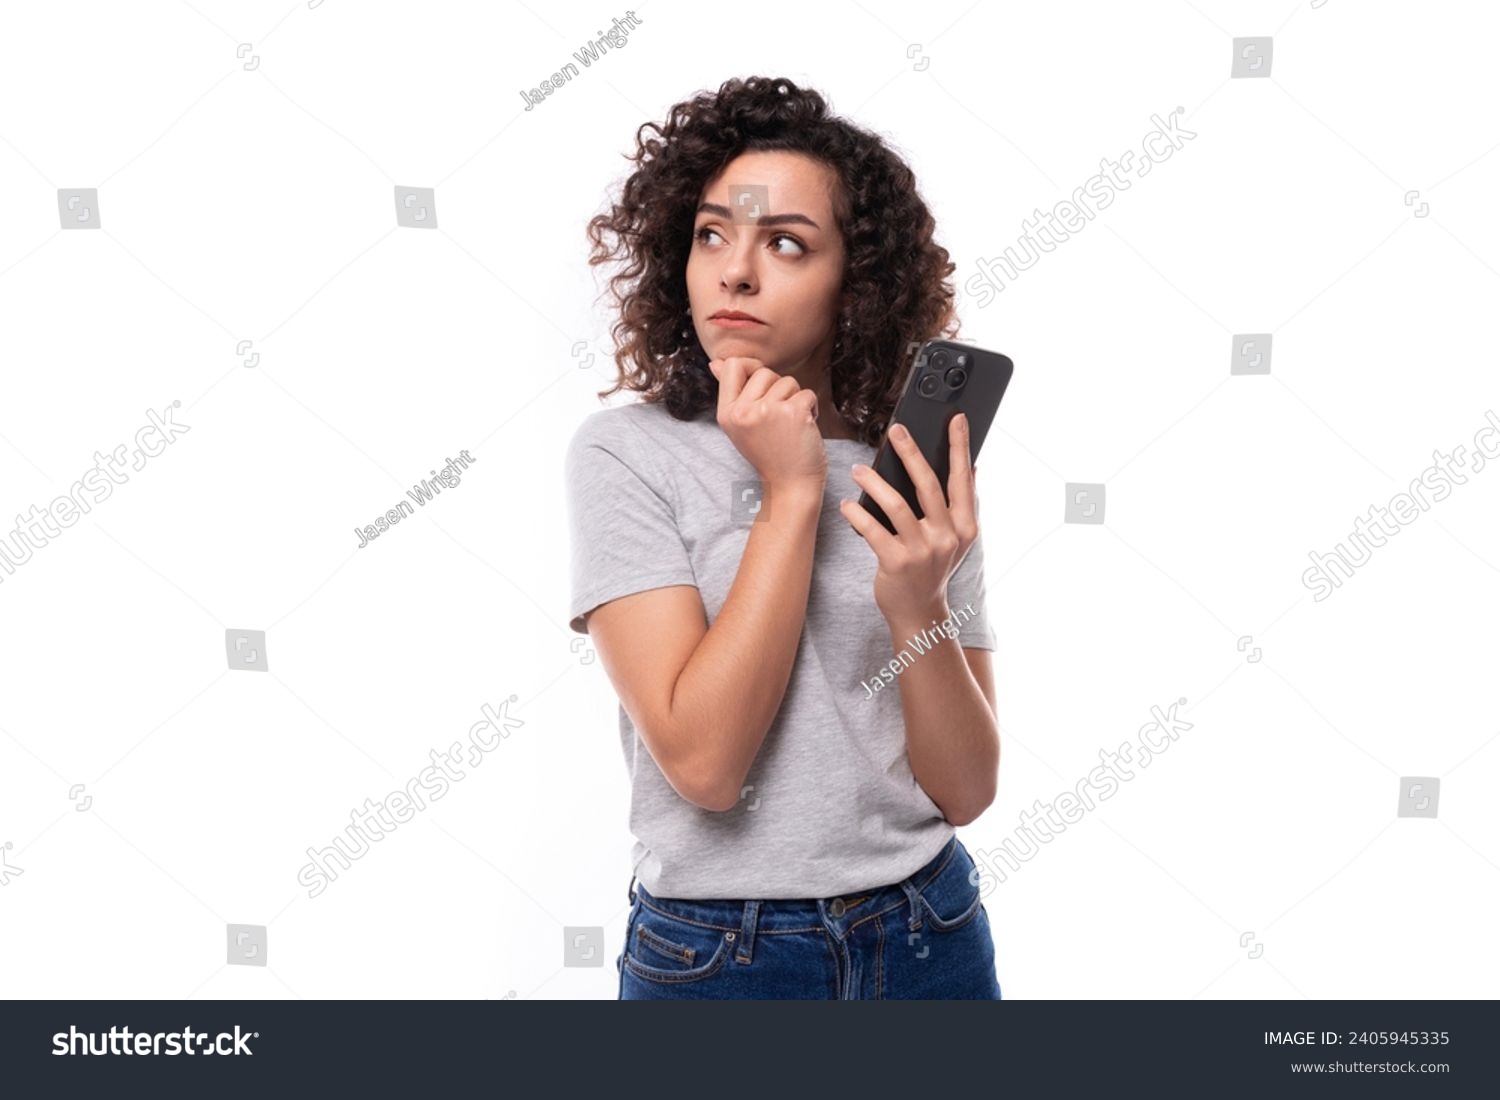 a young slender 30 year old caucasian woman with curly hair in a gray t-shirt uses instant messengers on a smartphone #2405945335